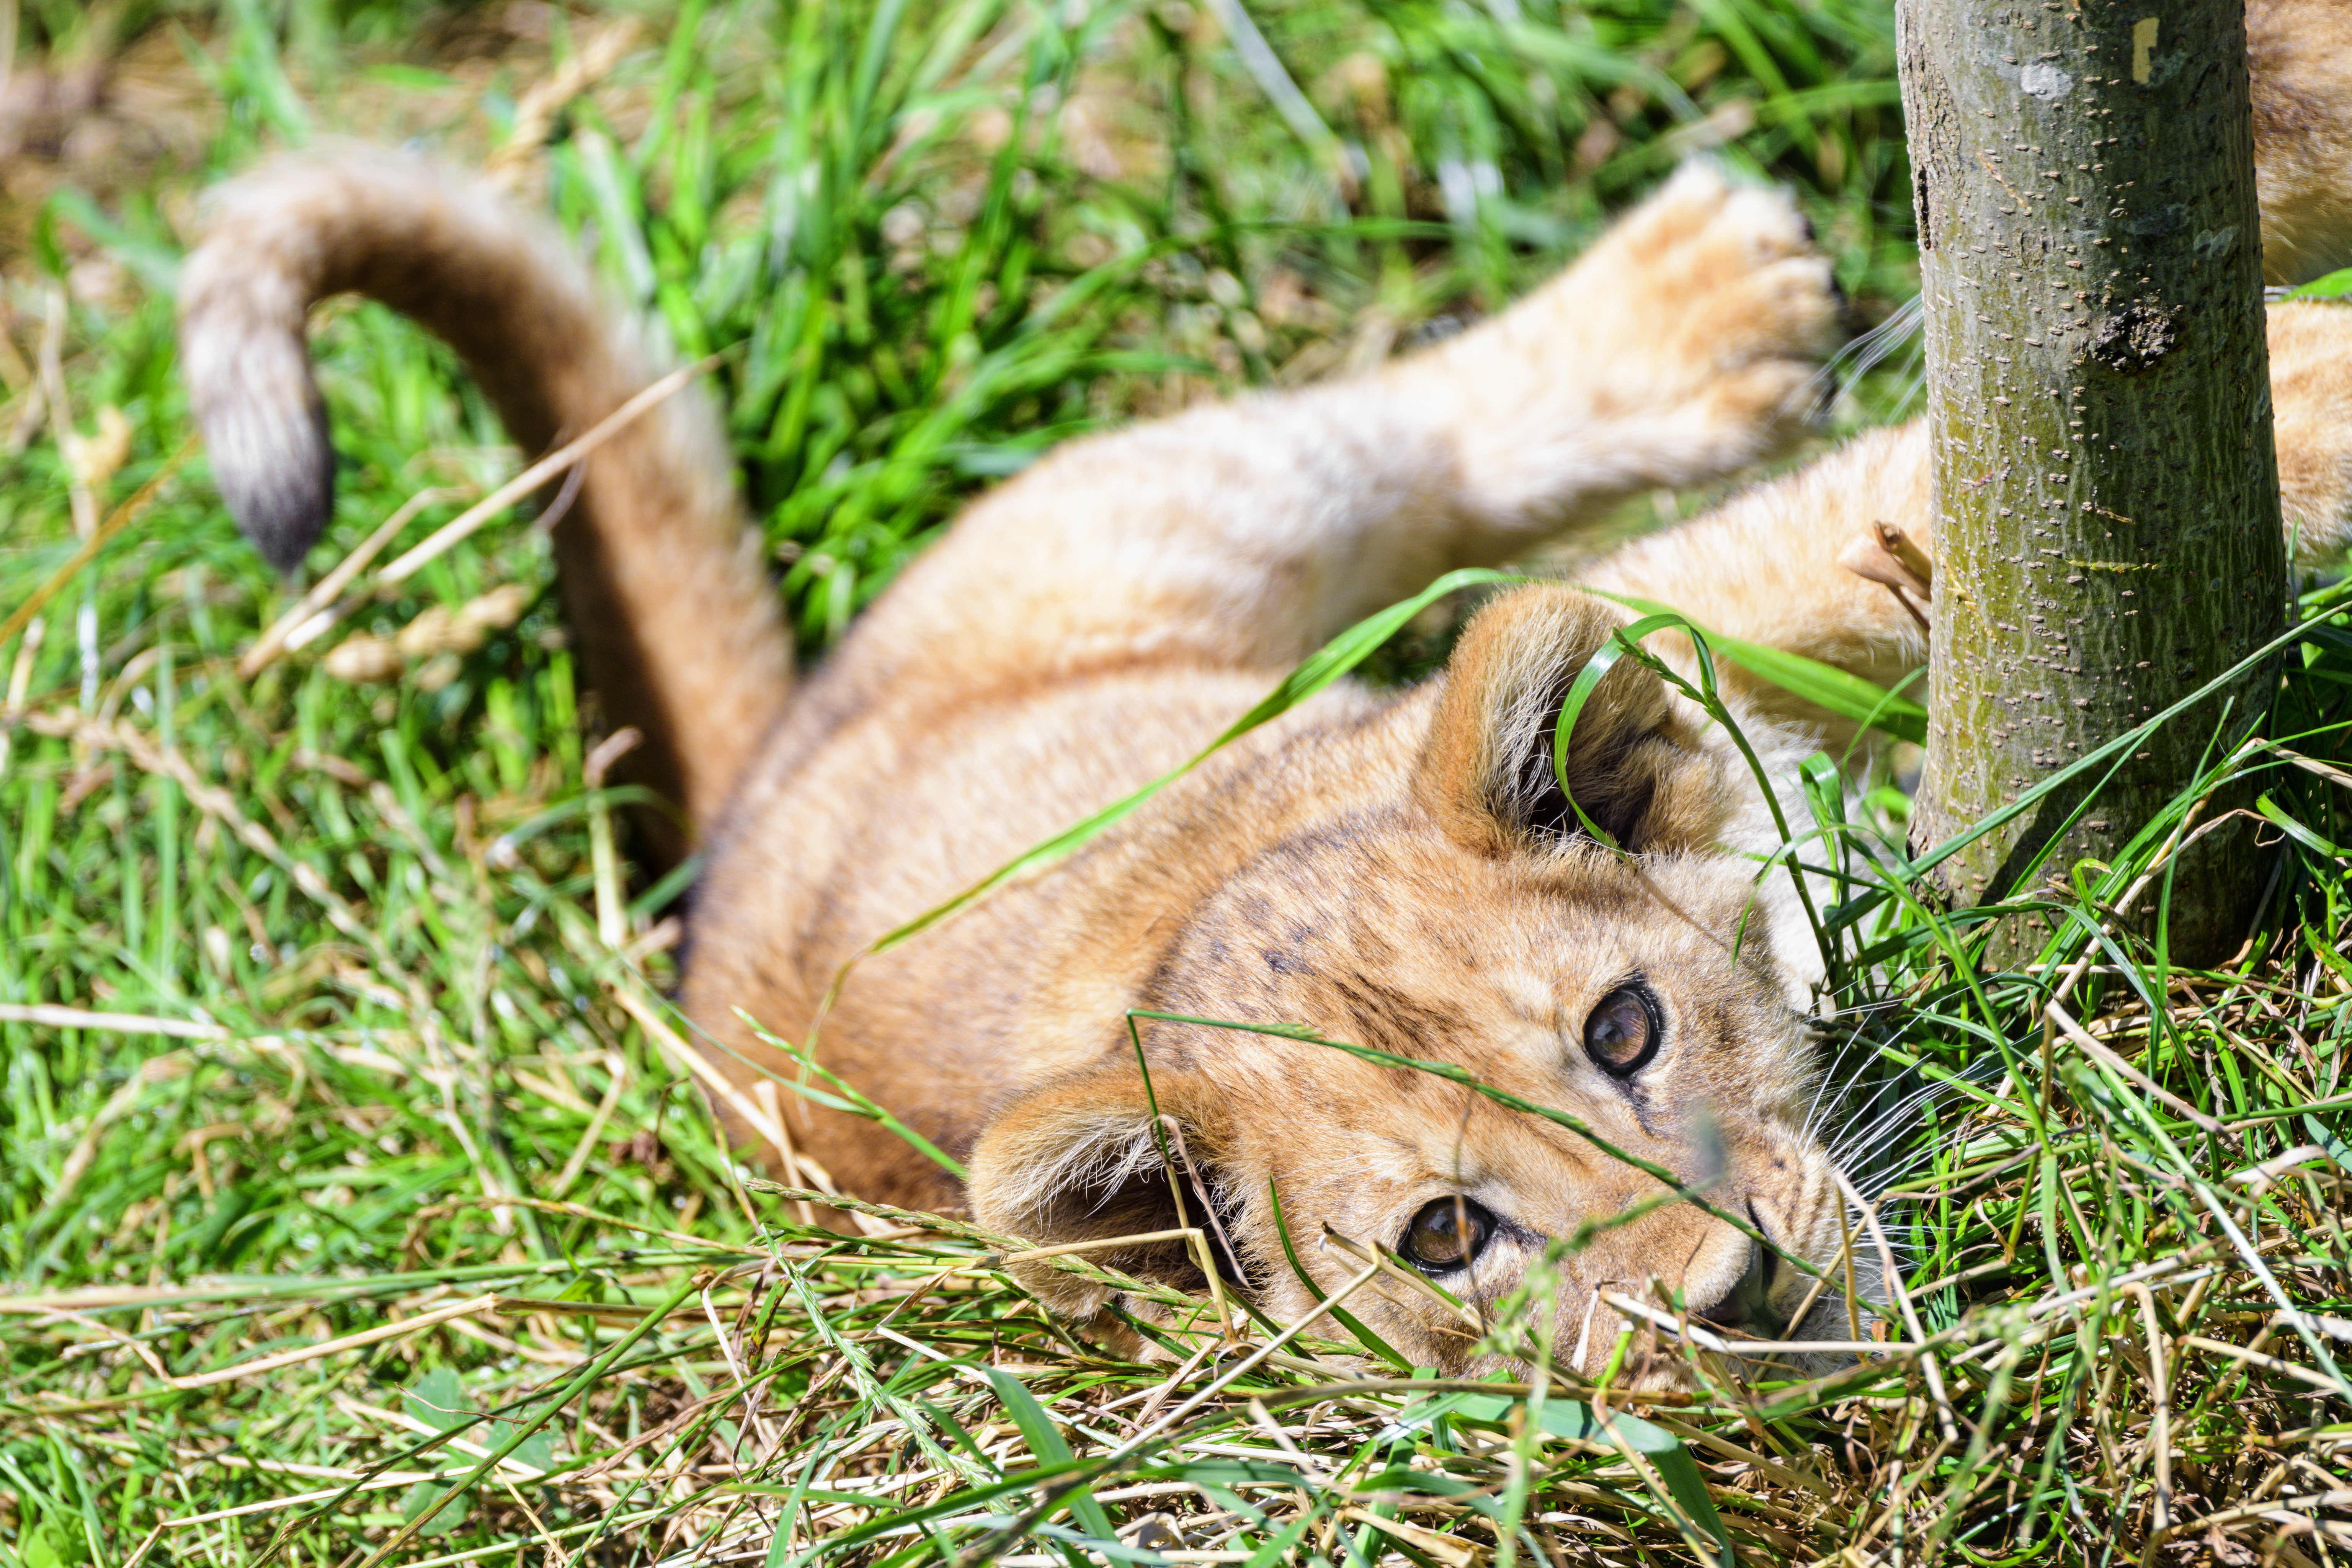 grass, animals, young, lion, nice, sweetheart, joey, lion cub Image for desktop